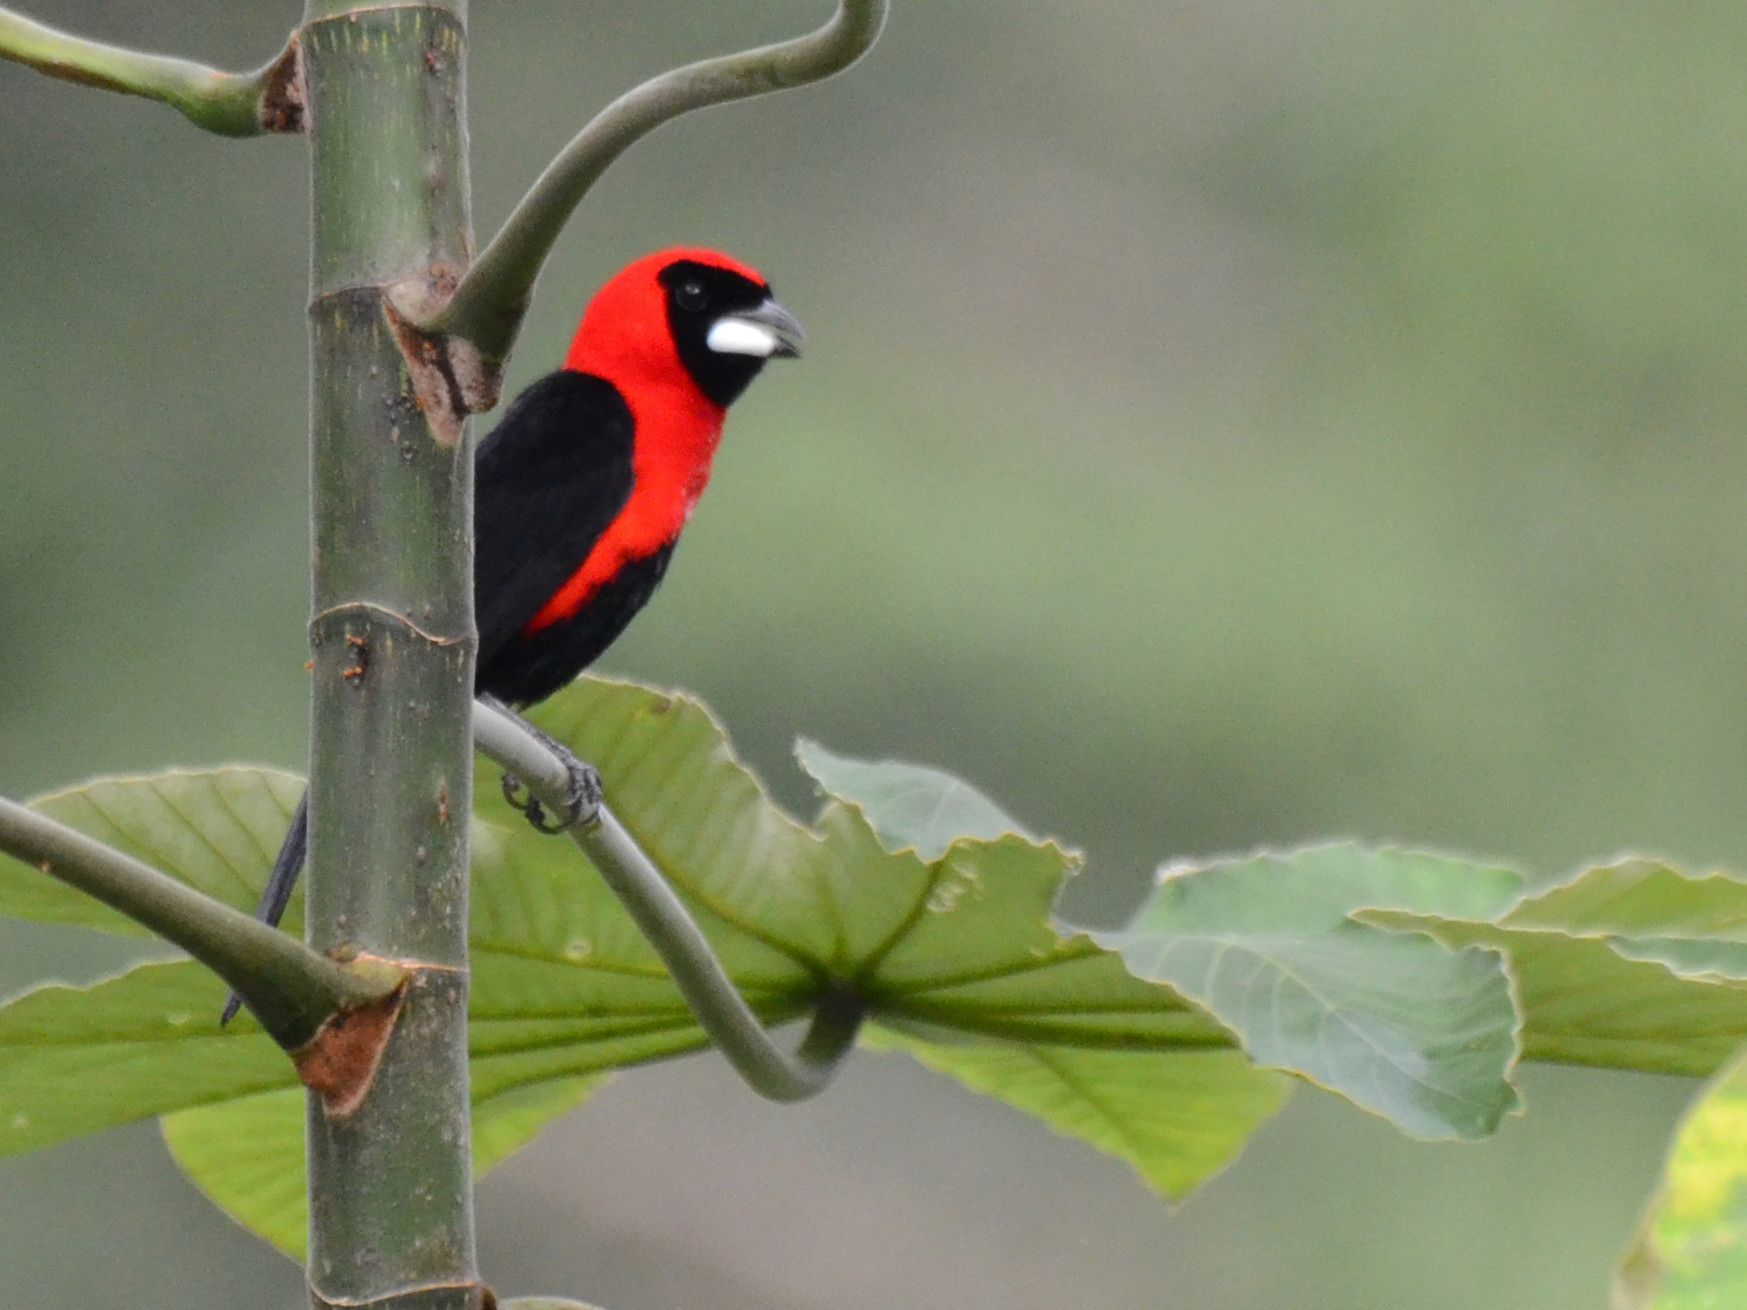 Click picture to see more Masked Crimson Tanagers.